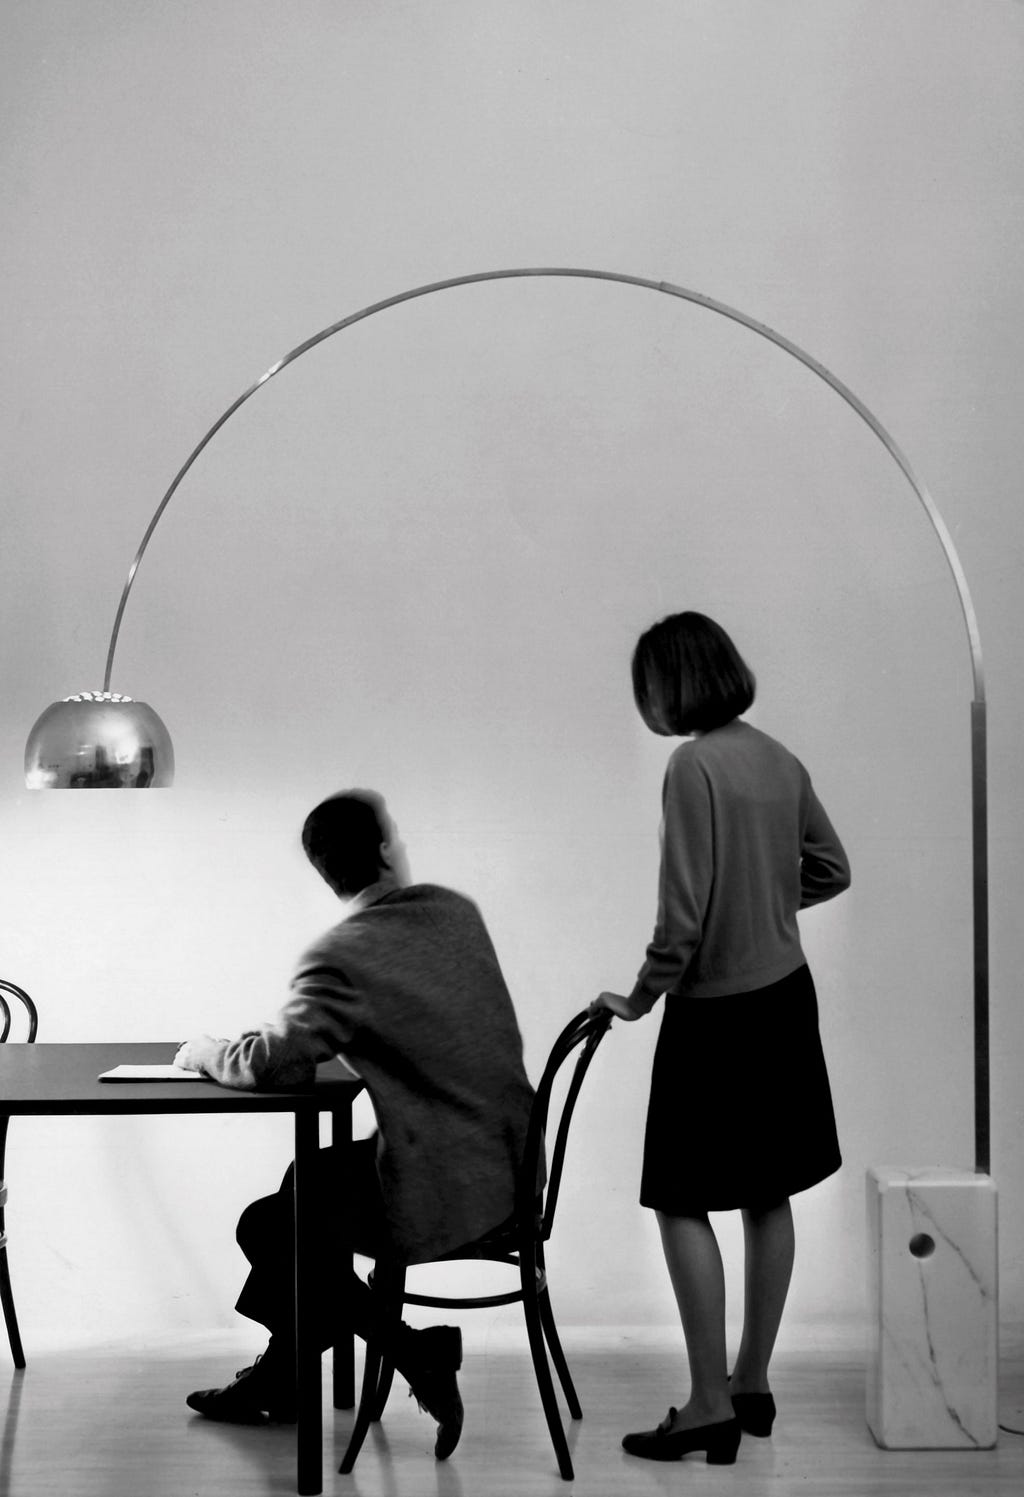 The Arco lamp designed for the studio Flos positioned above a dining table where a man is sitting and a woman standing next to him. The lamp creates an arc above them and shines light onto the table.